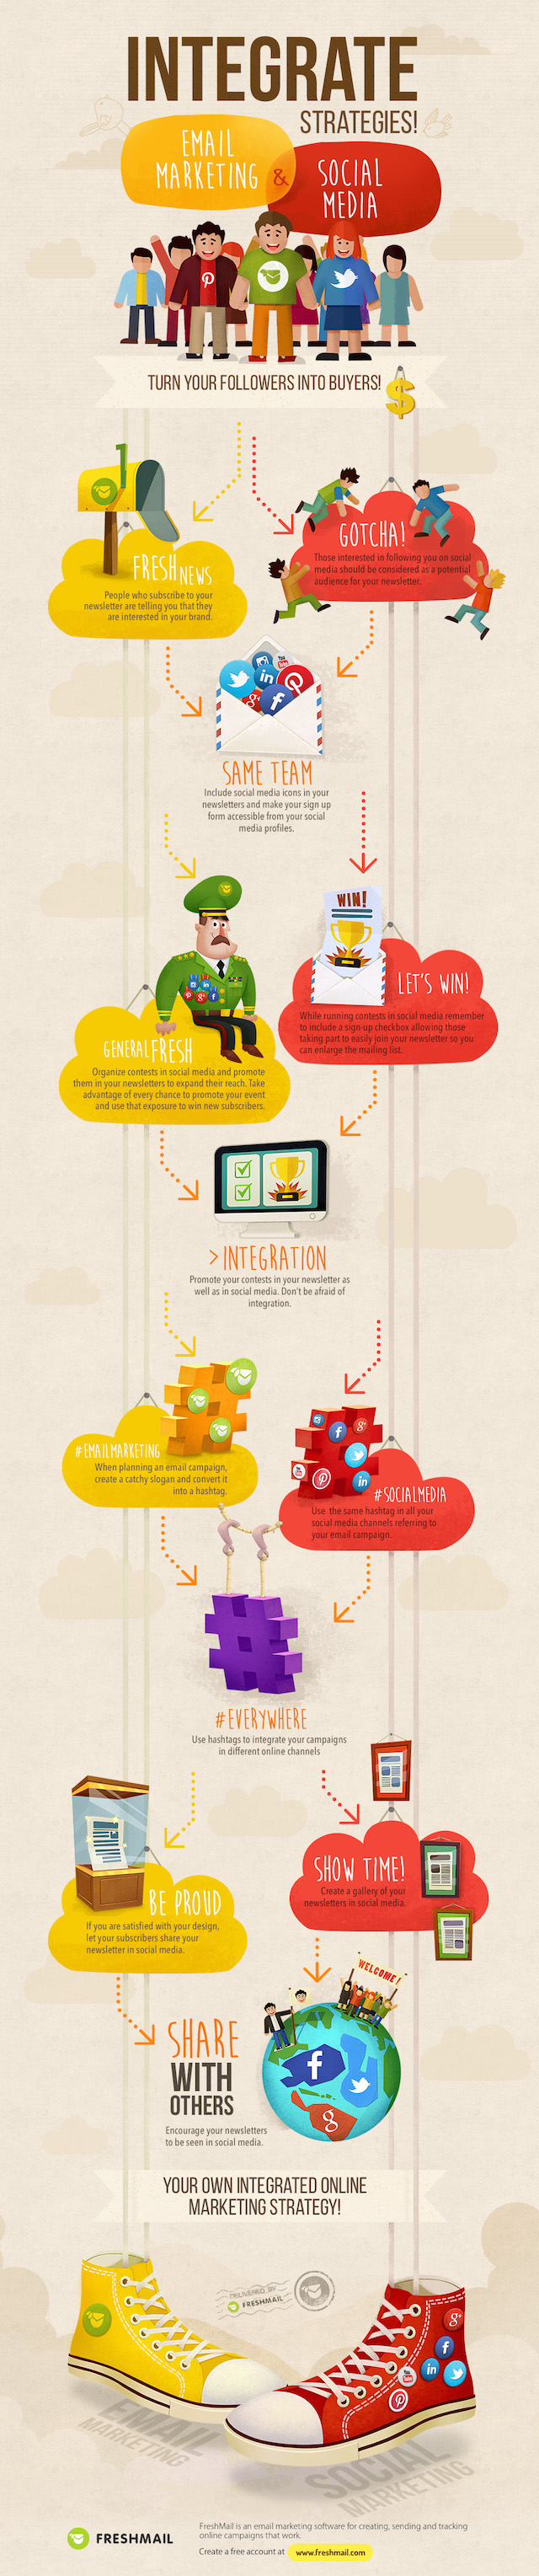 Social & EmailMarketing infographic